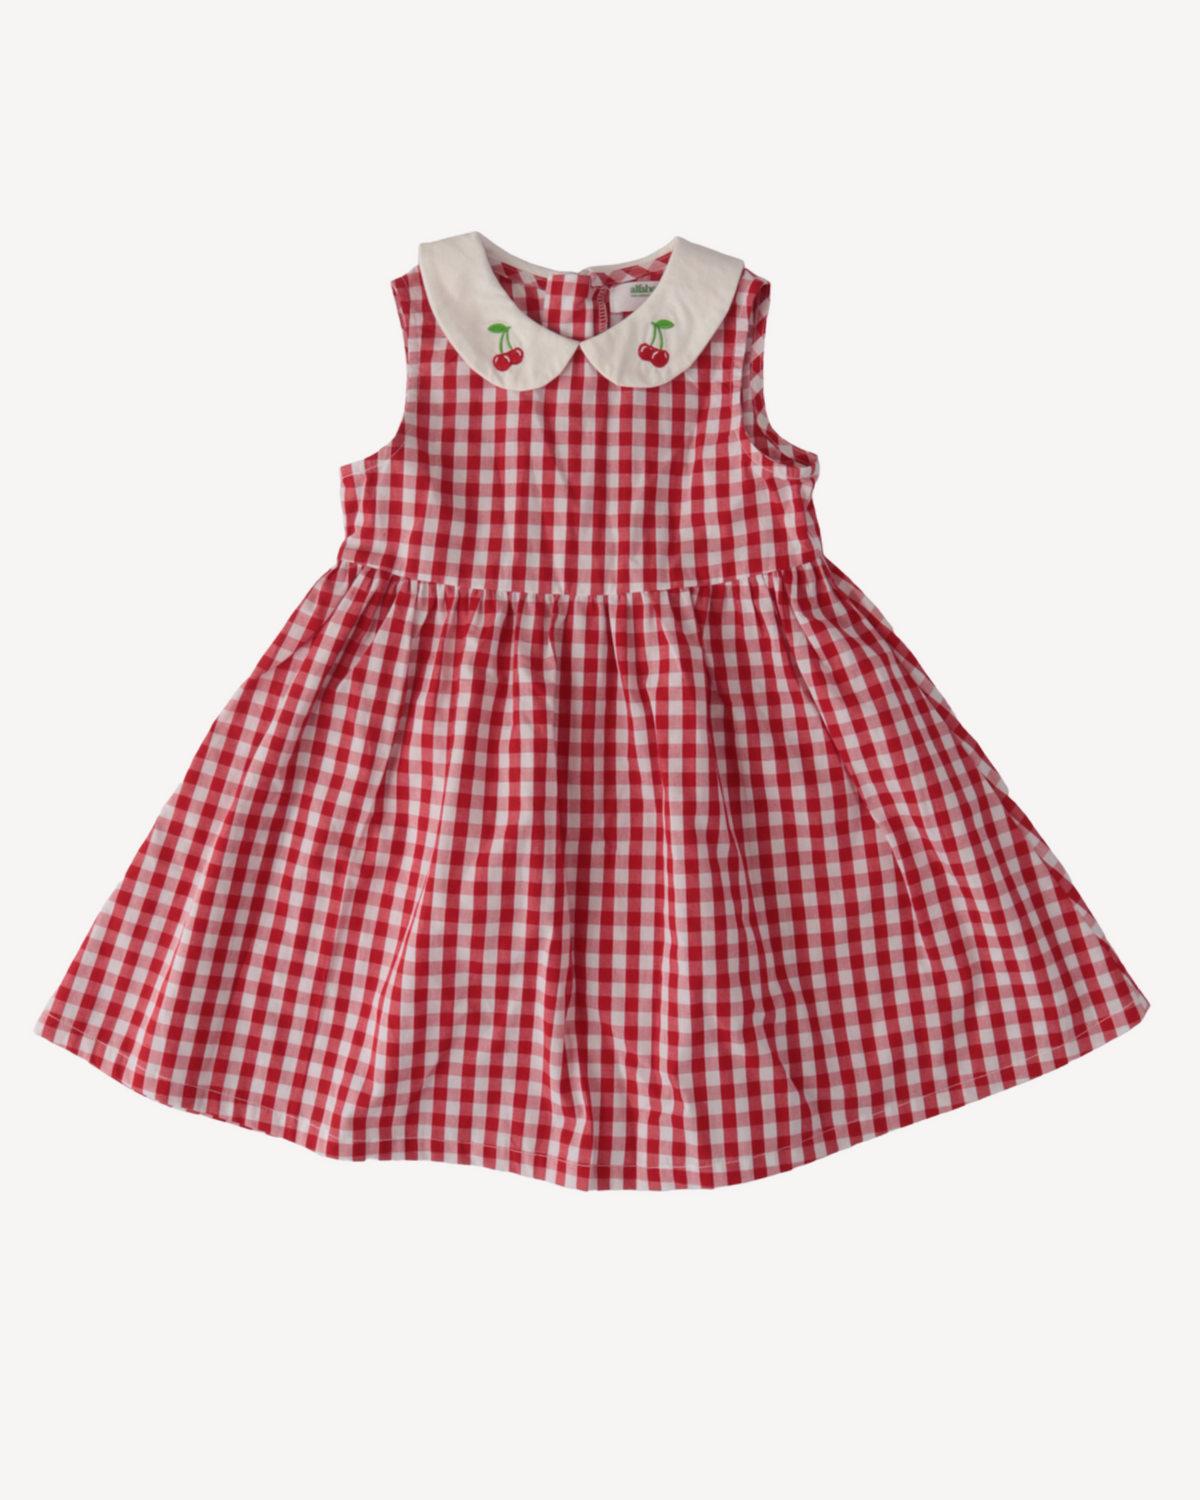 Cherry Dress in Gingham Red